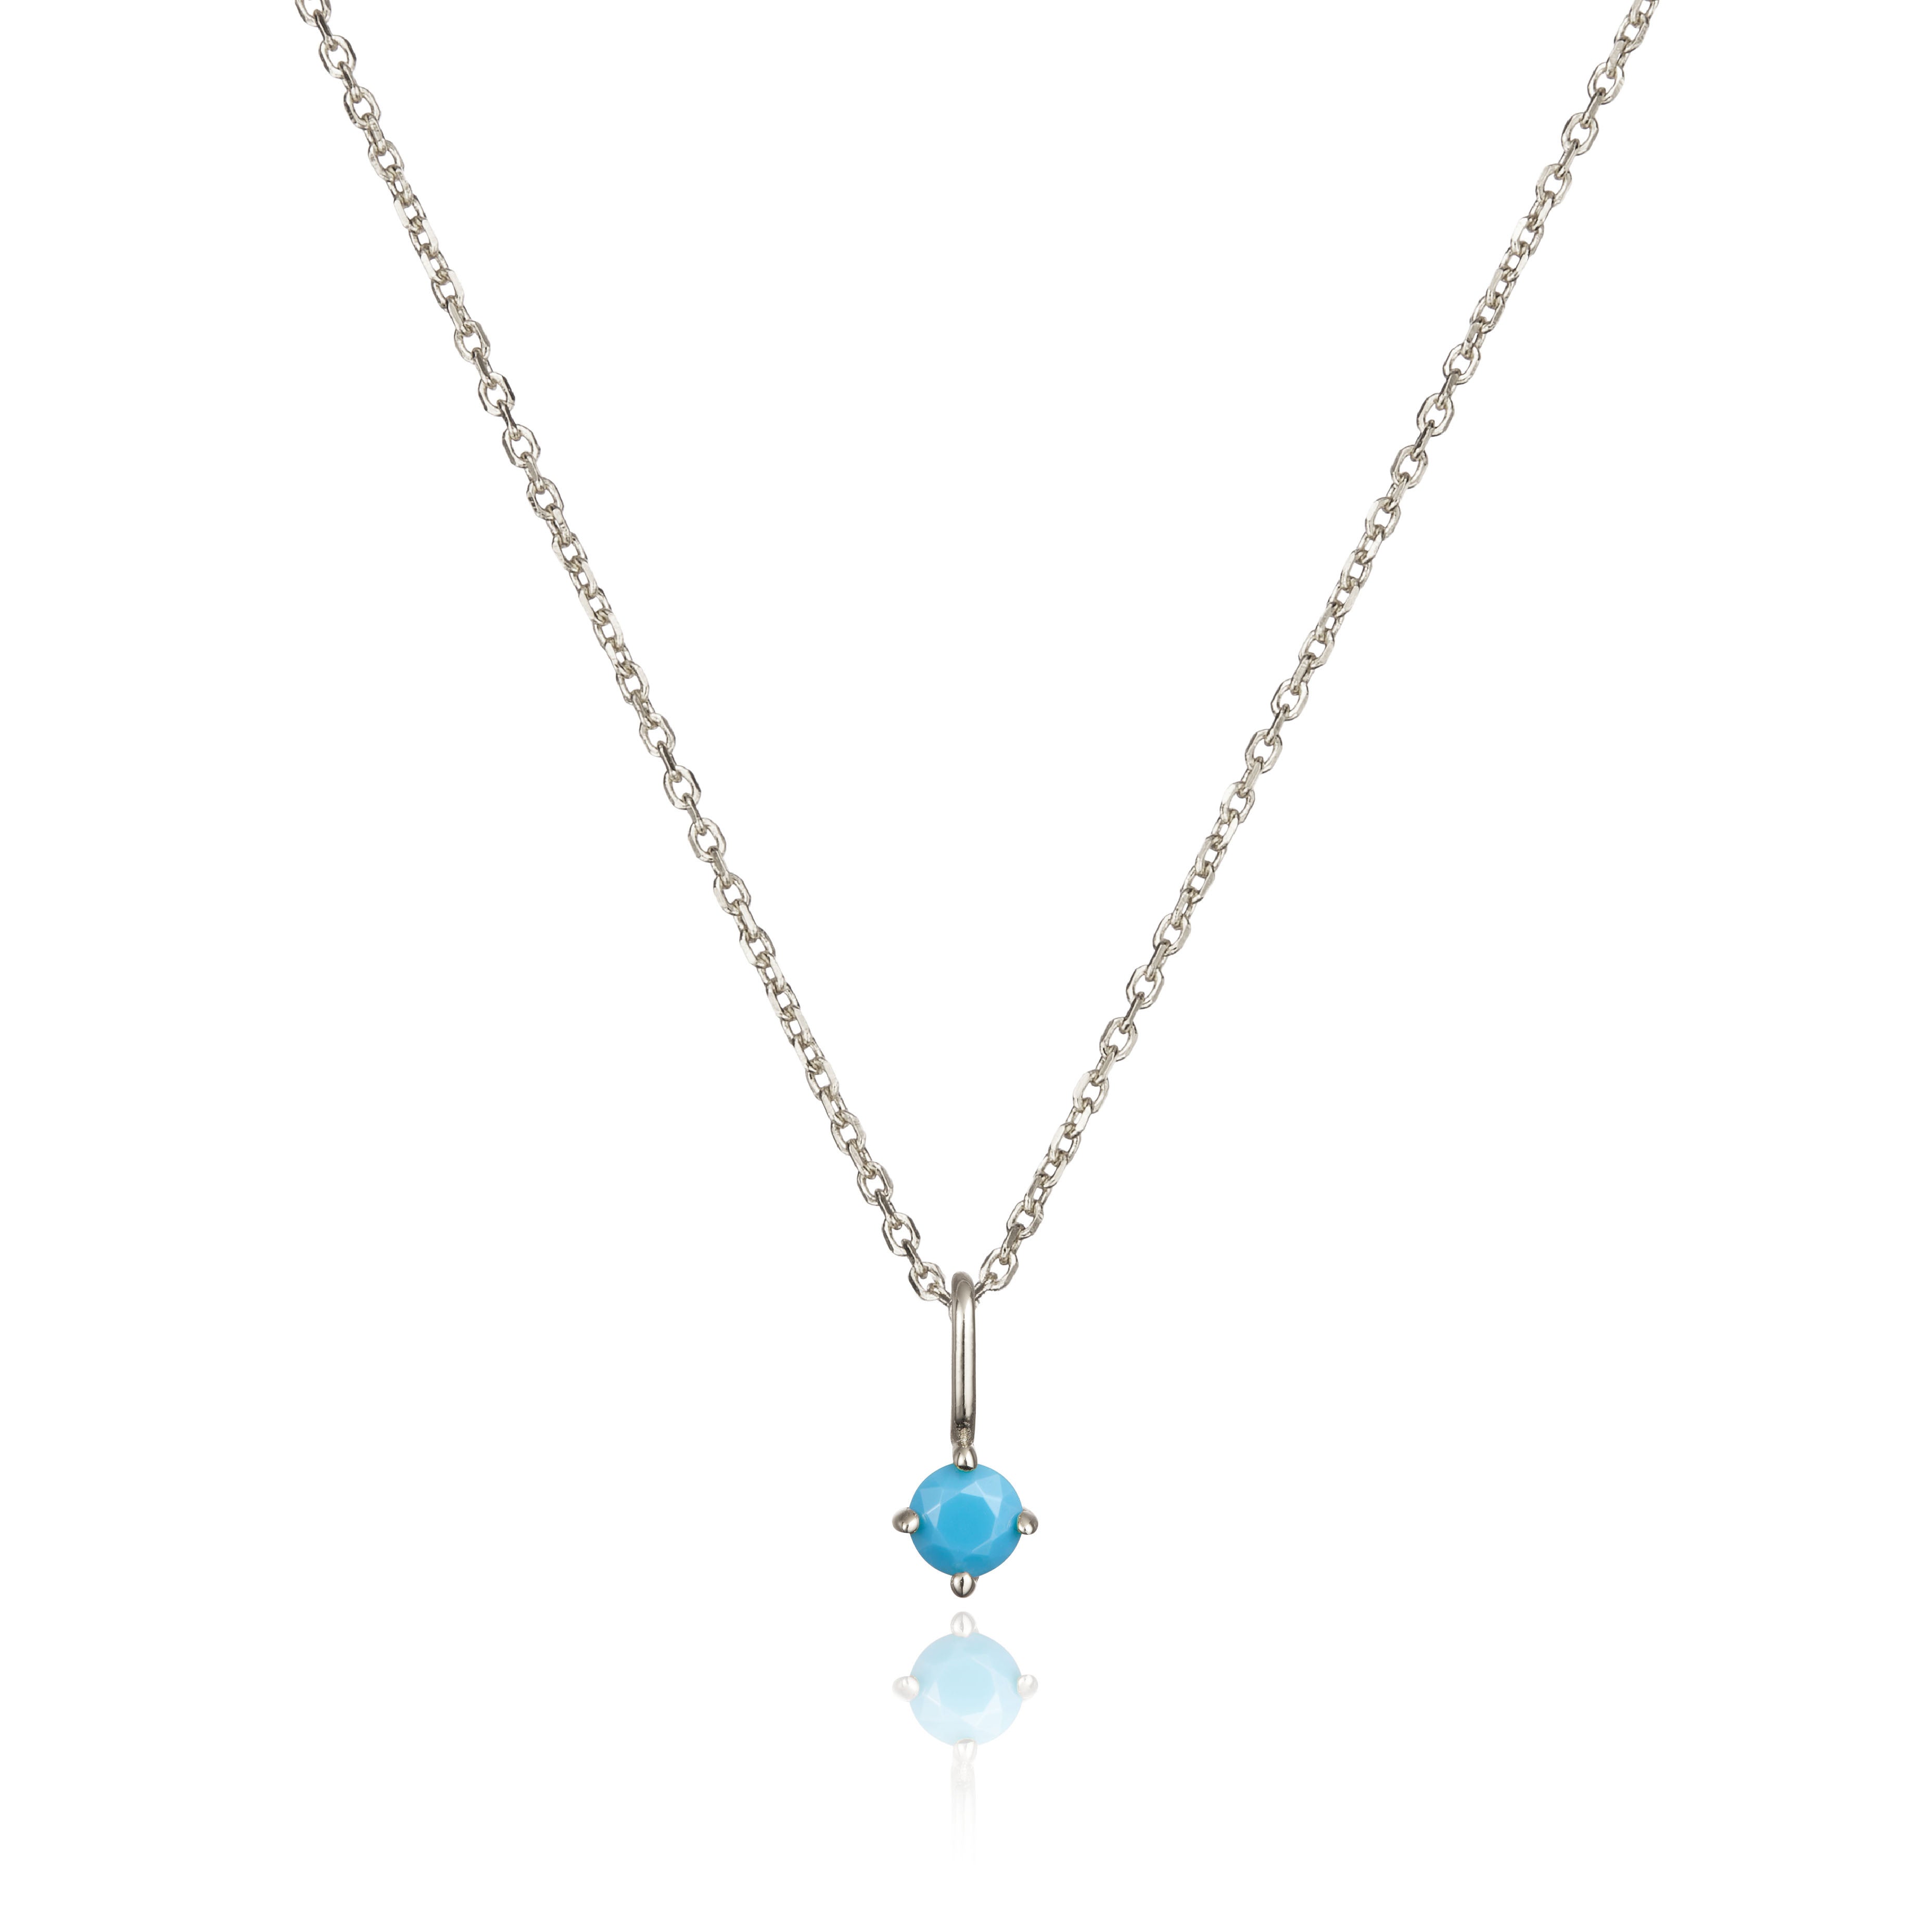 Solid White Gold Small Birthstone Pendant Necklace